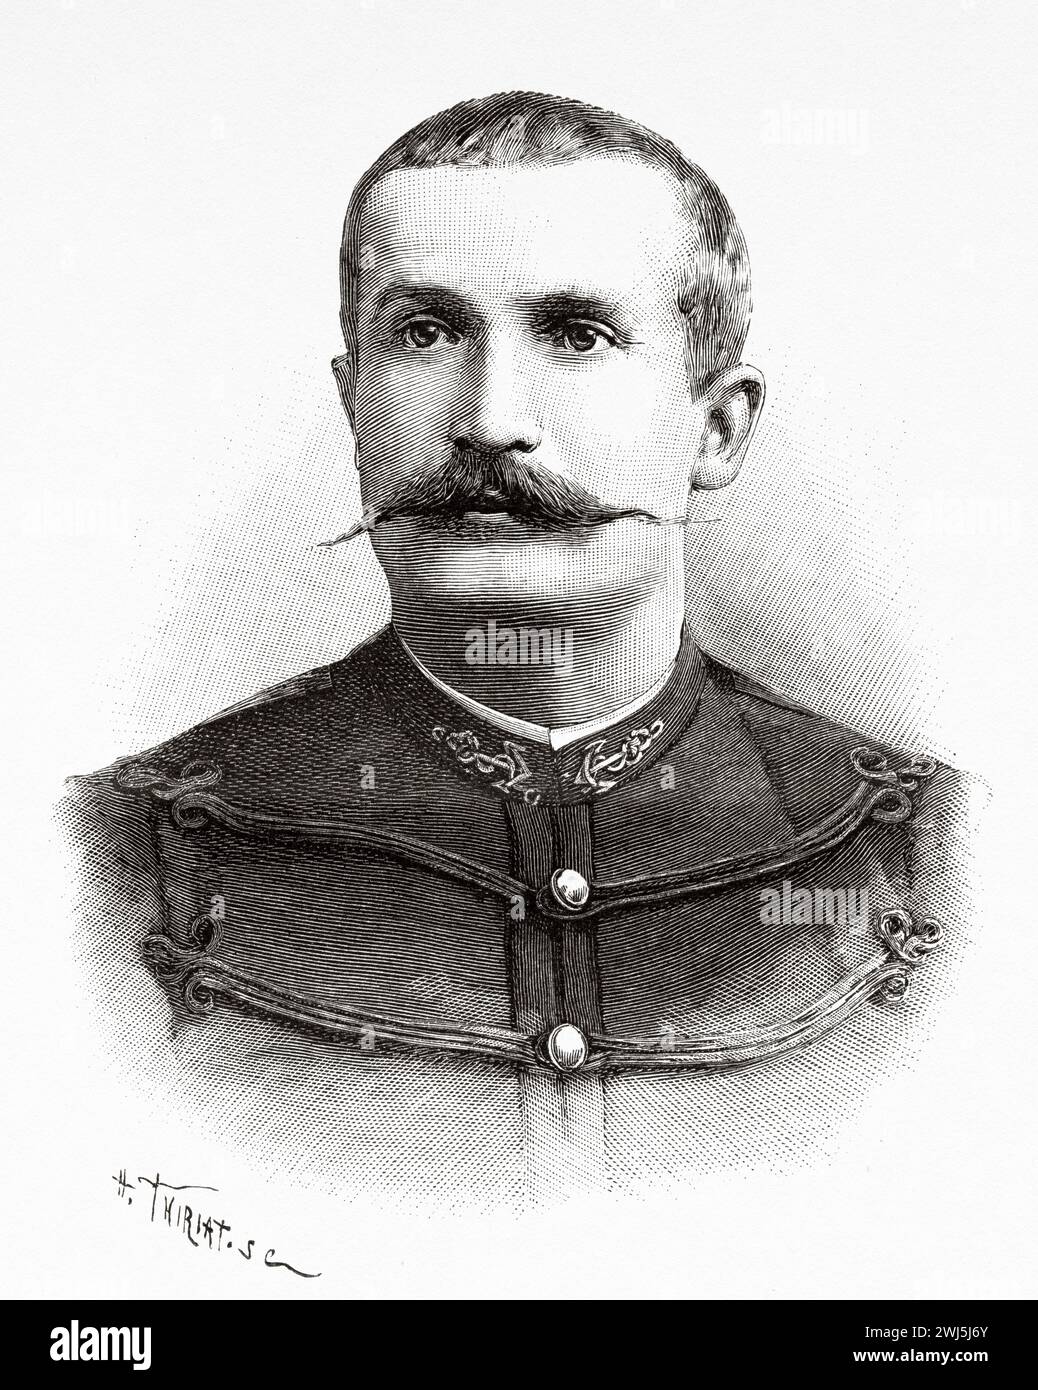 French Captain Oberdorf, Africa. Two campaigns in French Sudan, 1886-1888 by Joseph Simon Gallieni (1849 - 1916) Le Tour du Monde 1890 Stock Photo